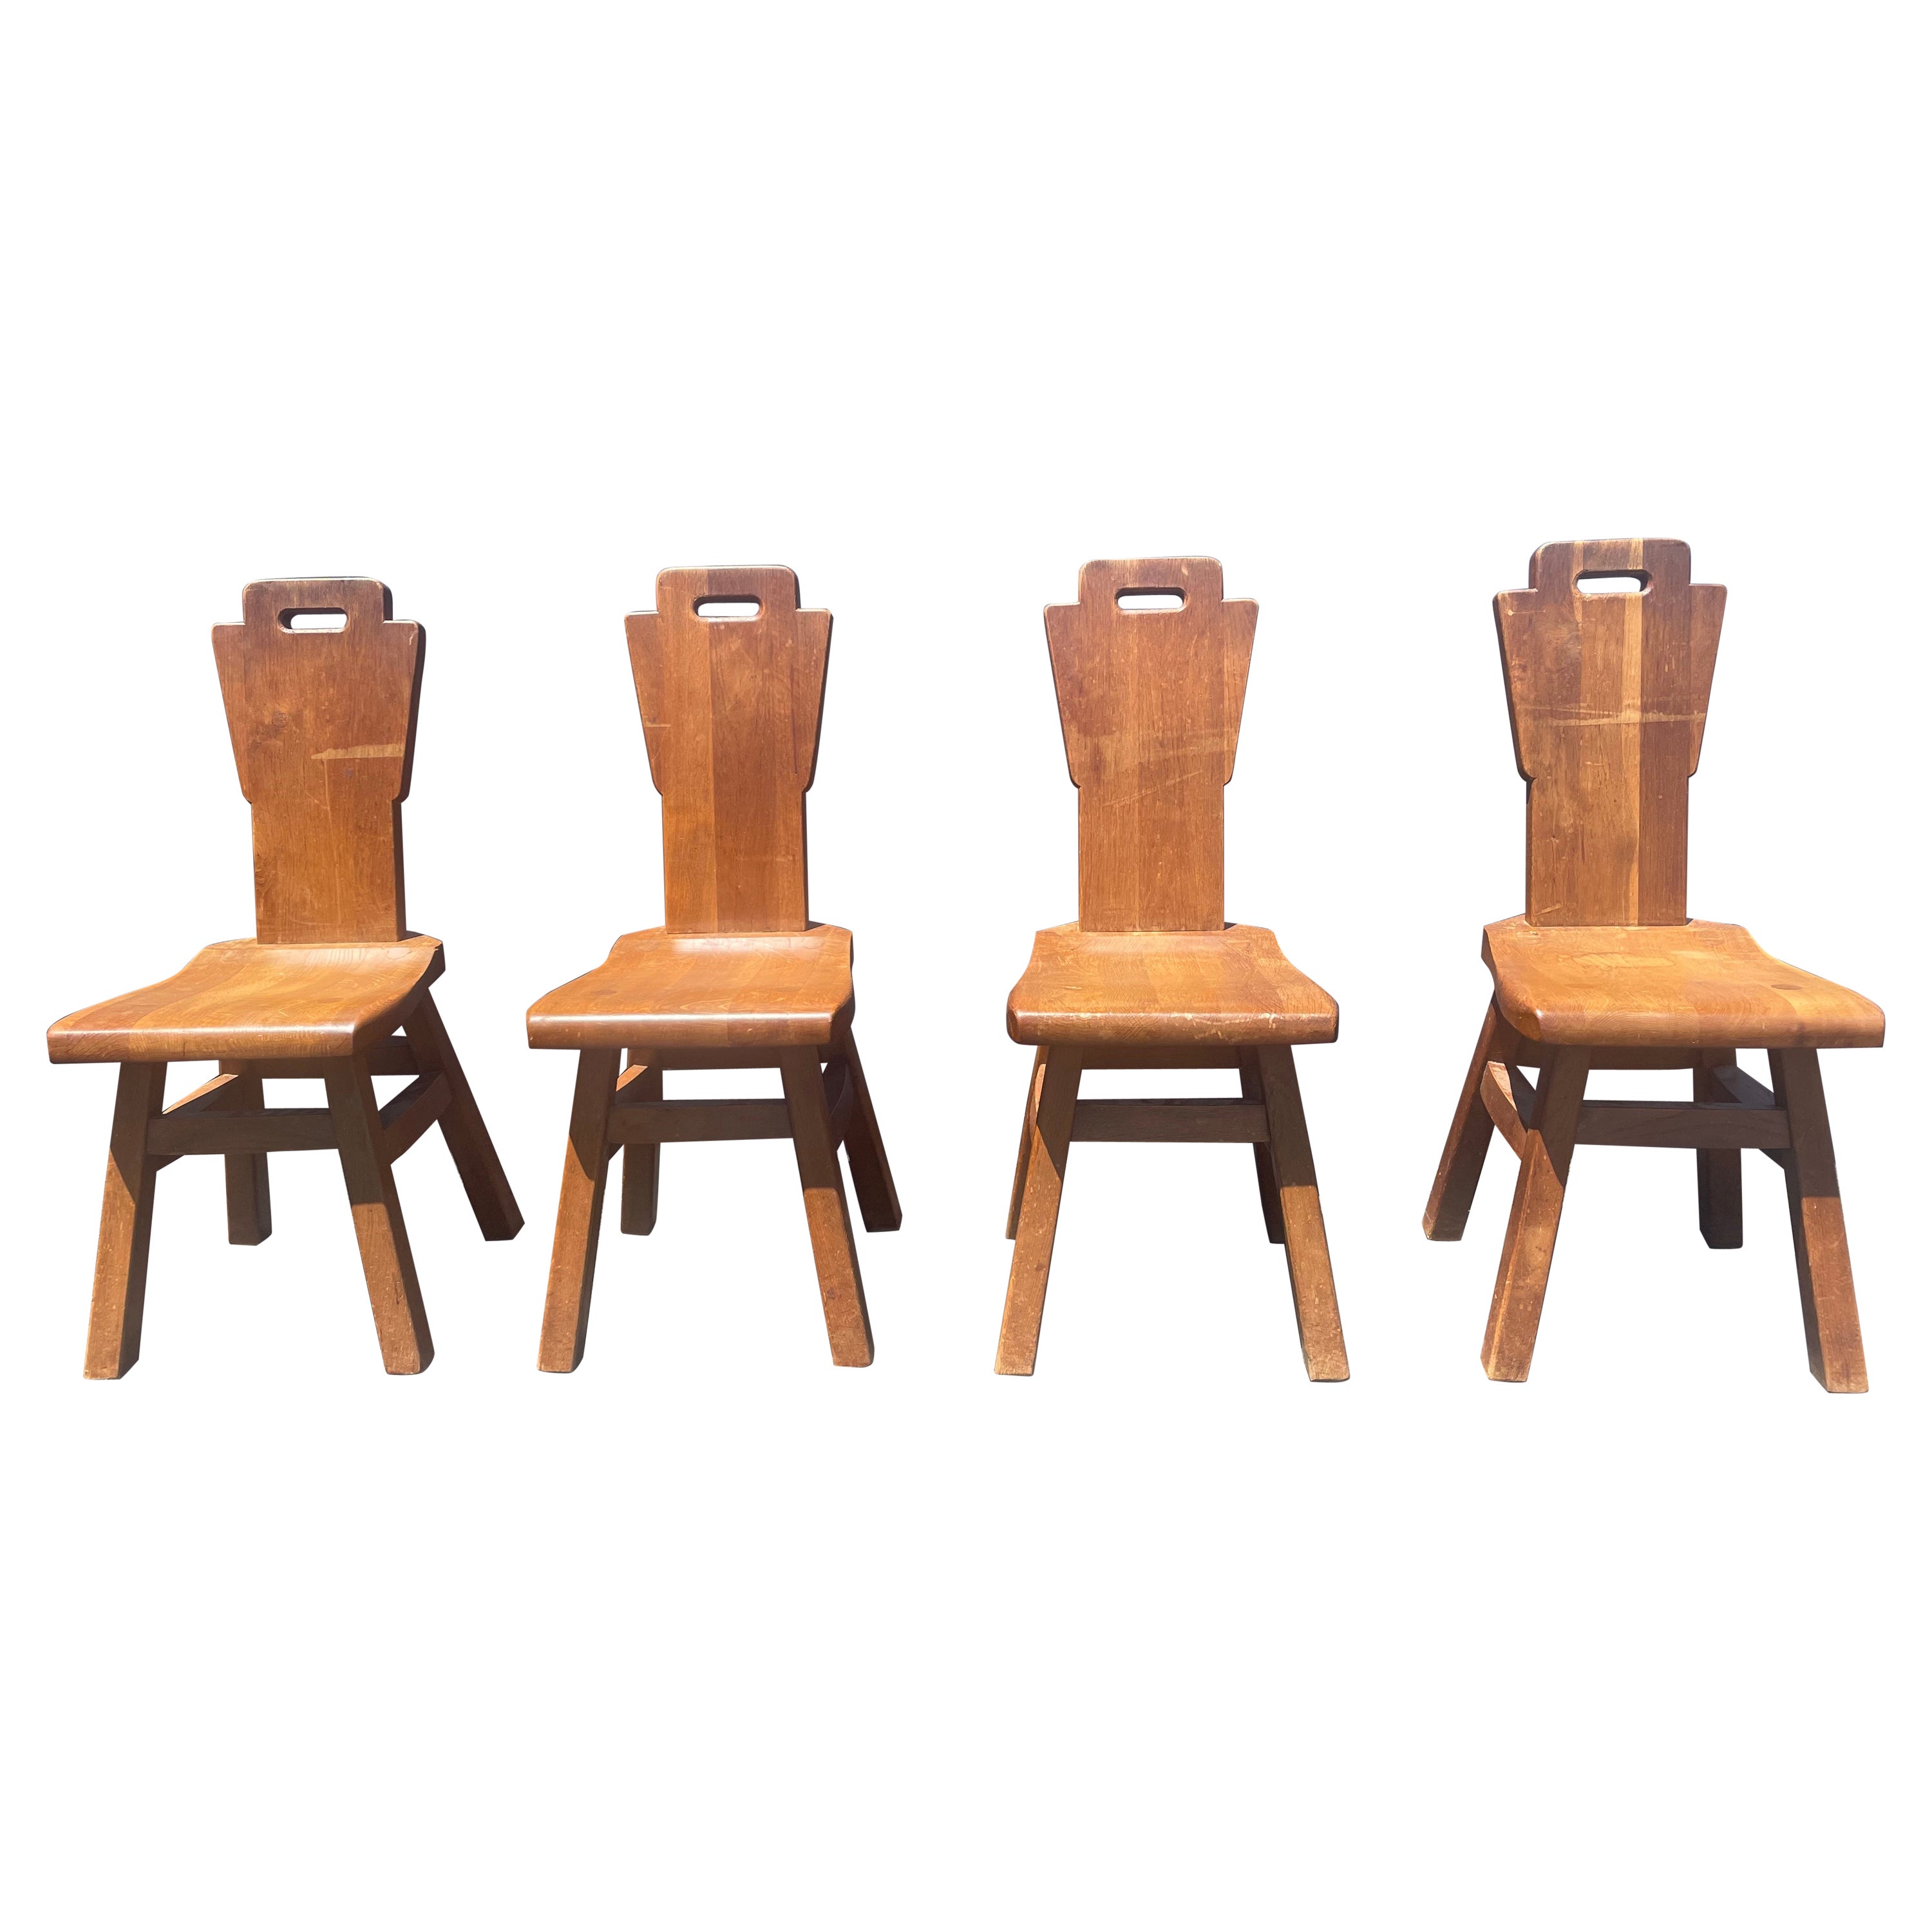 Set of 4 Brutalist Oak Dining Chairs, Netherlands, Circa 1970s For Sale